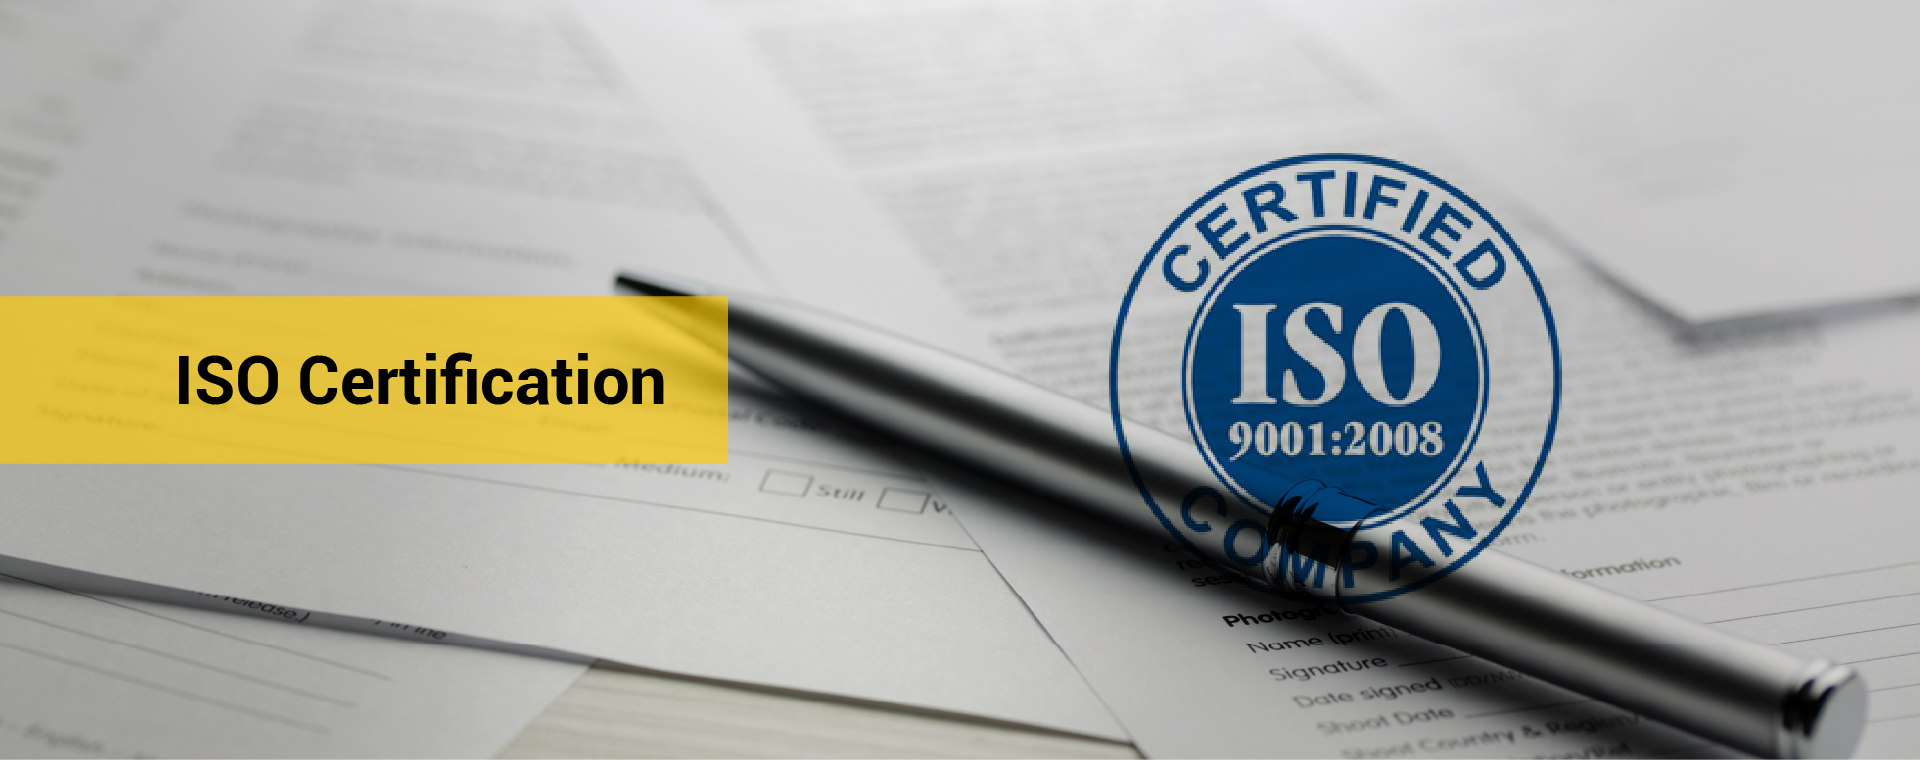 ISO Certification Consultants in Bangalore